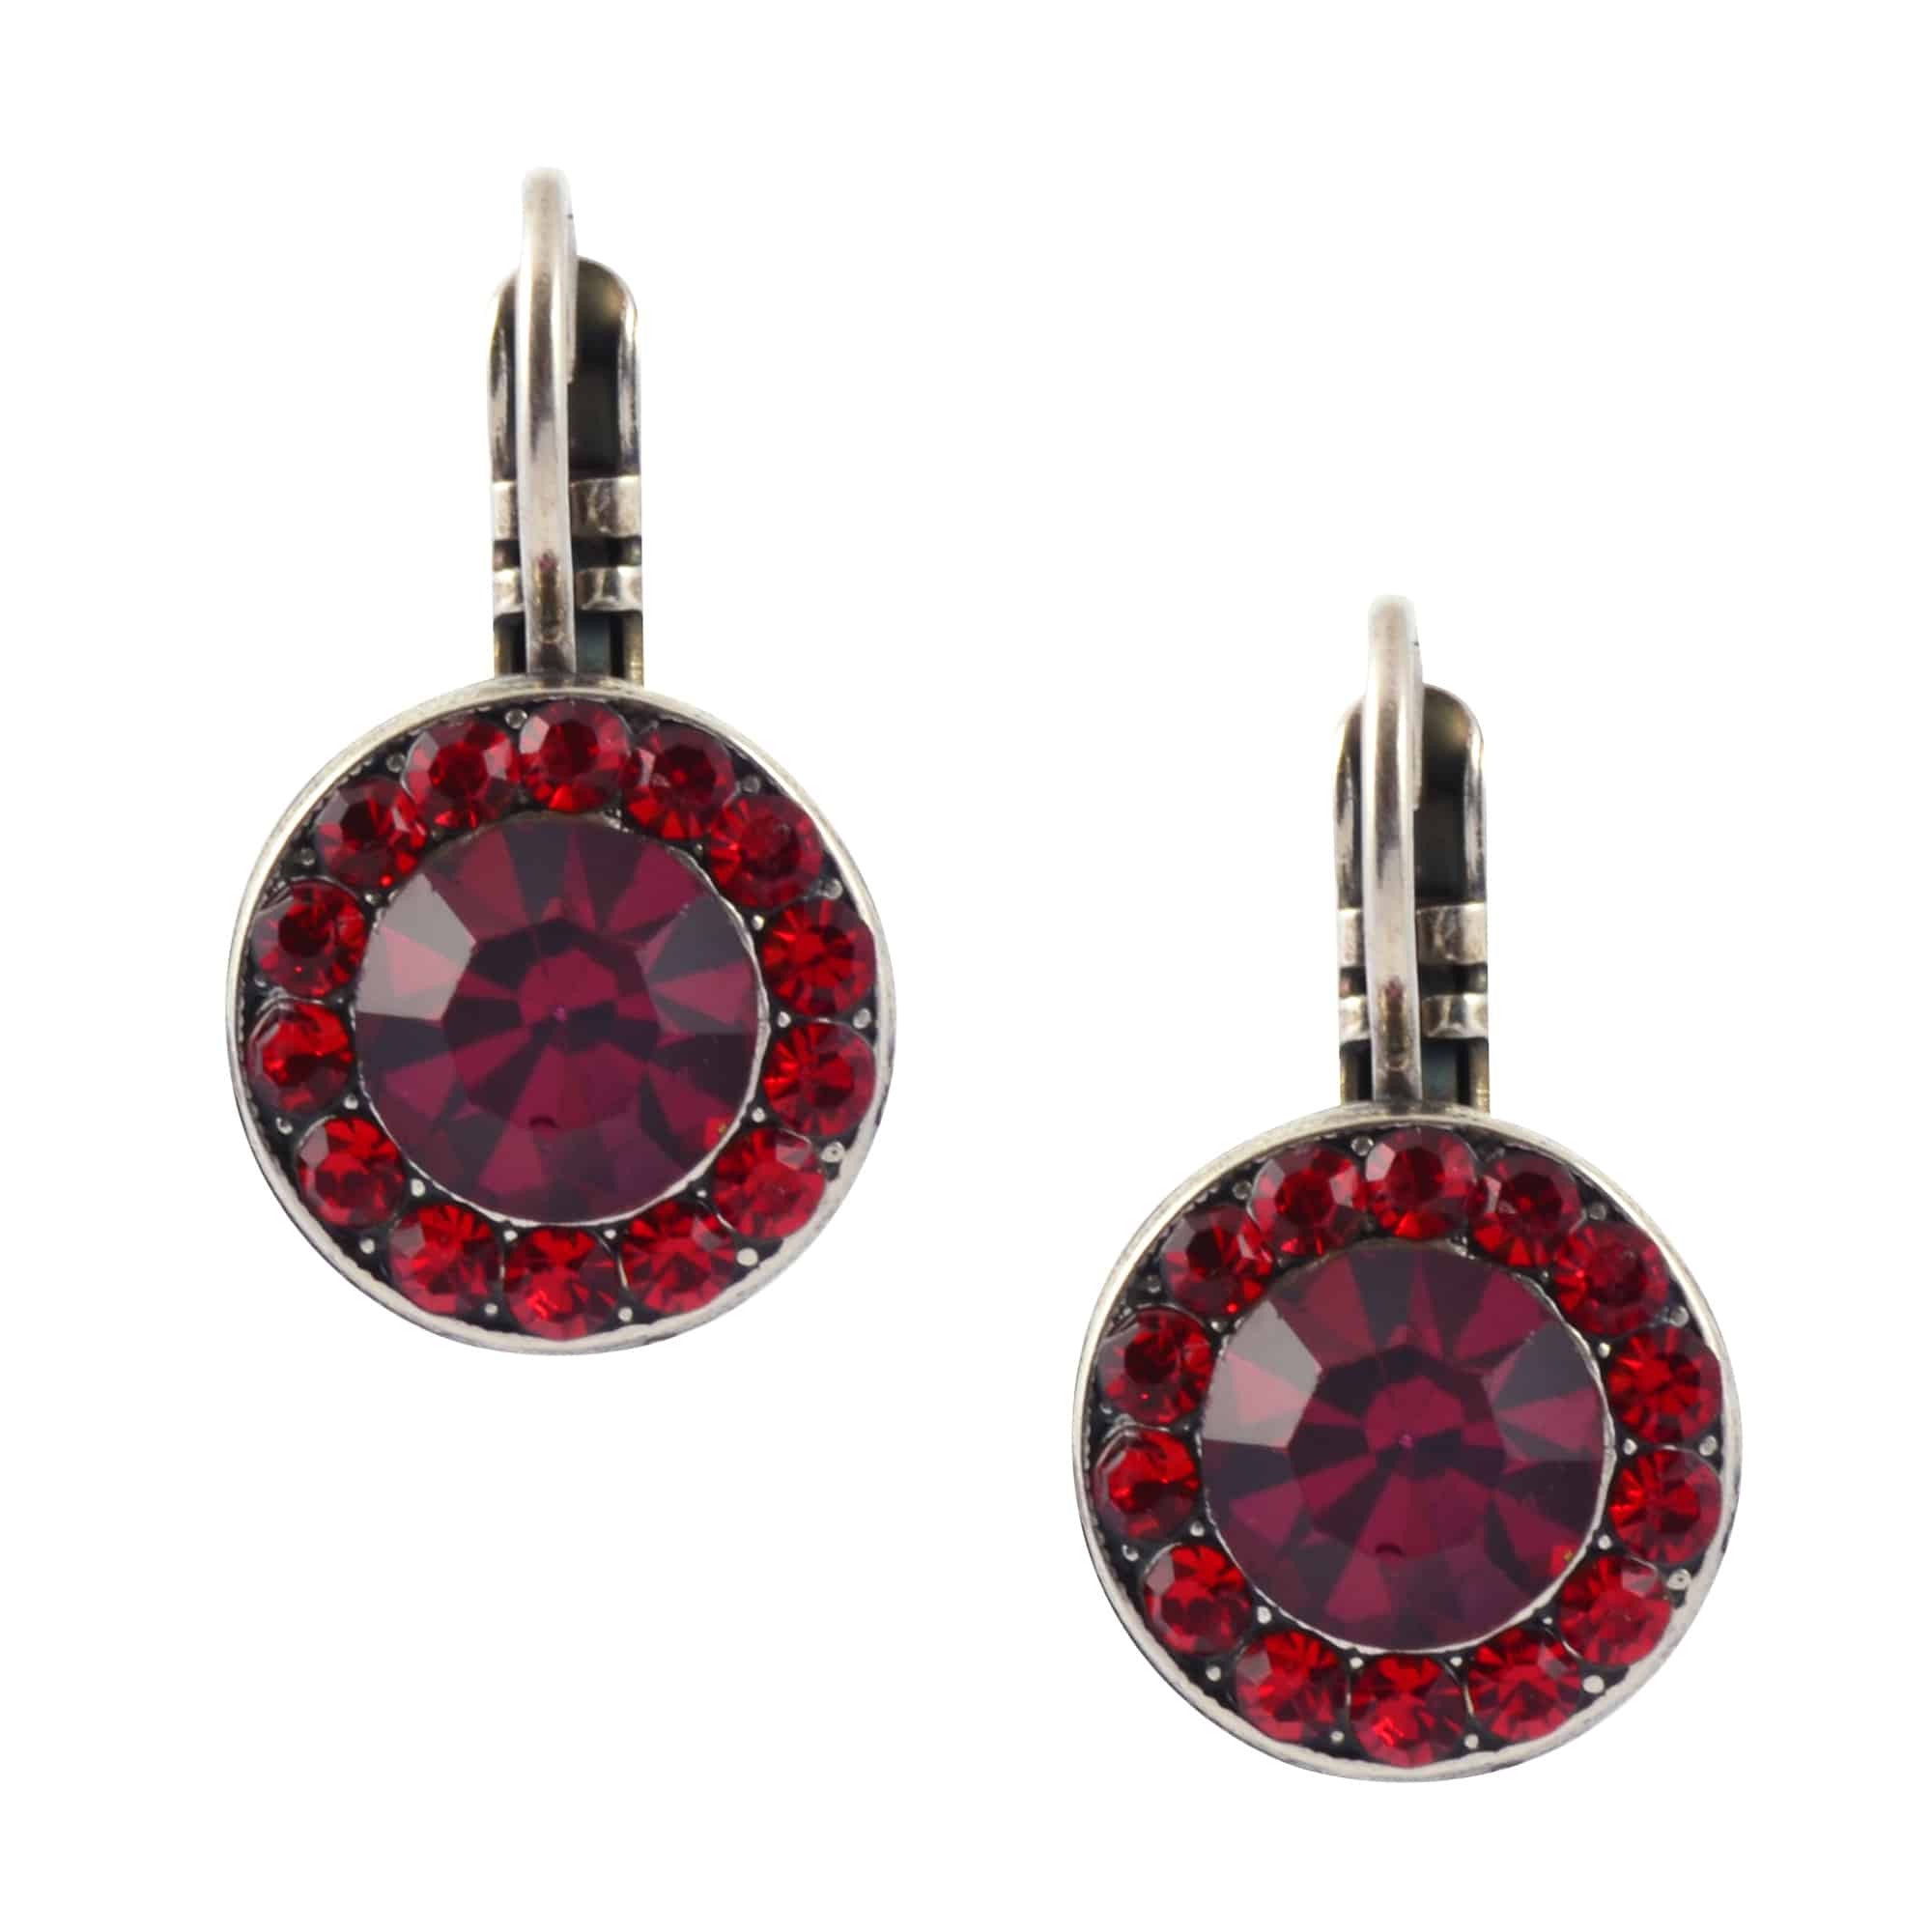 Mariana Jewelry Lady in Red Silver Plated Petite Circle Drop Earrings 1129 1070